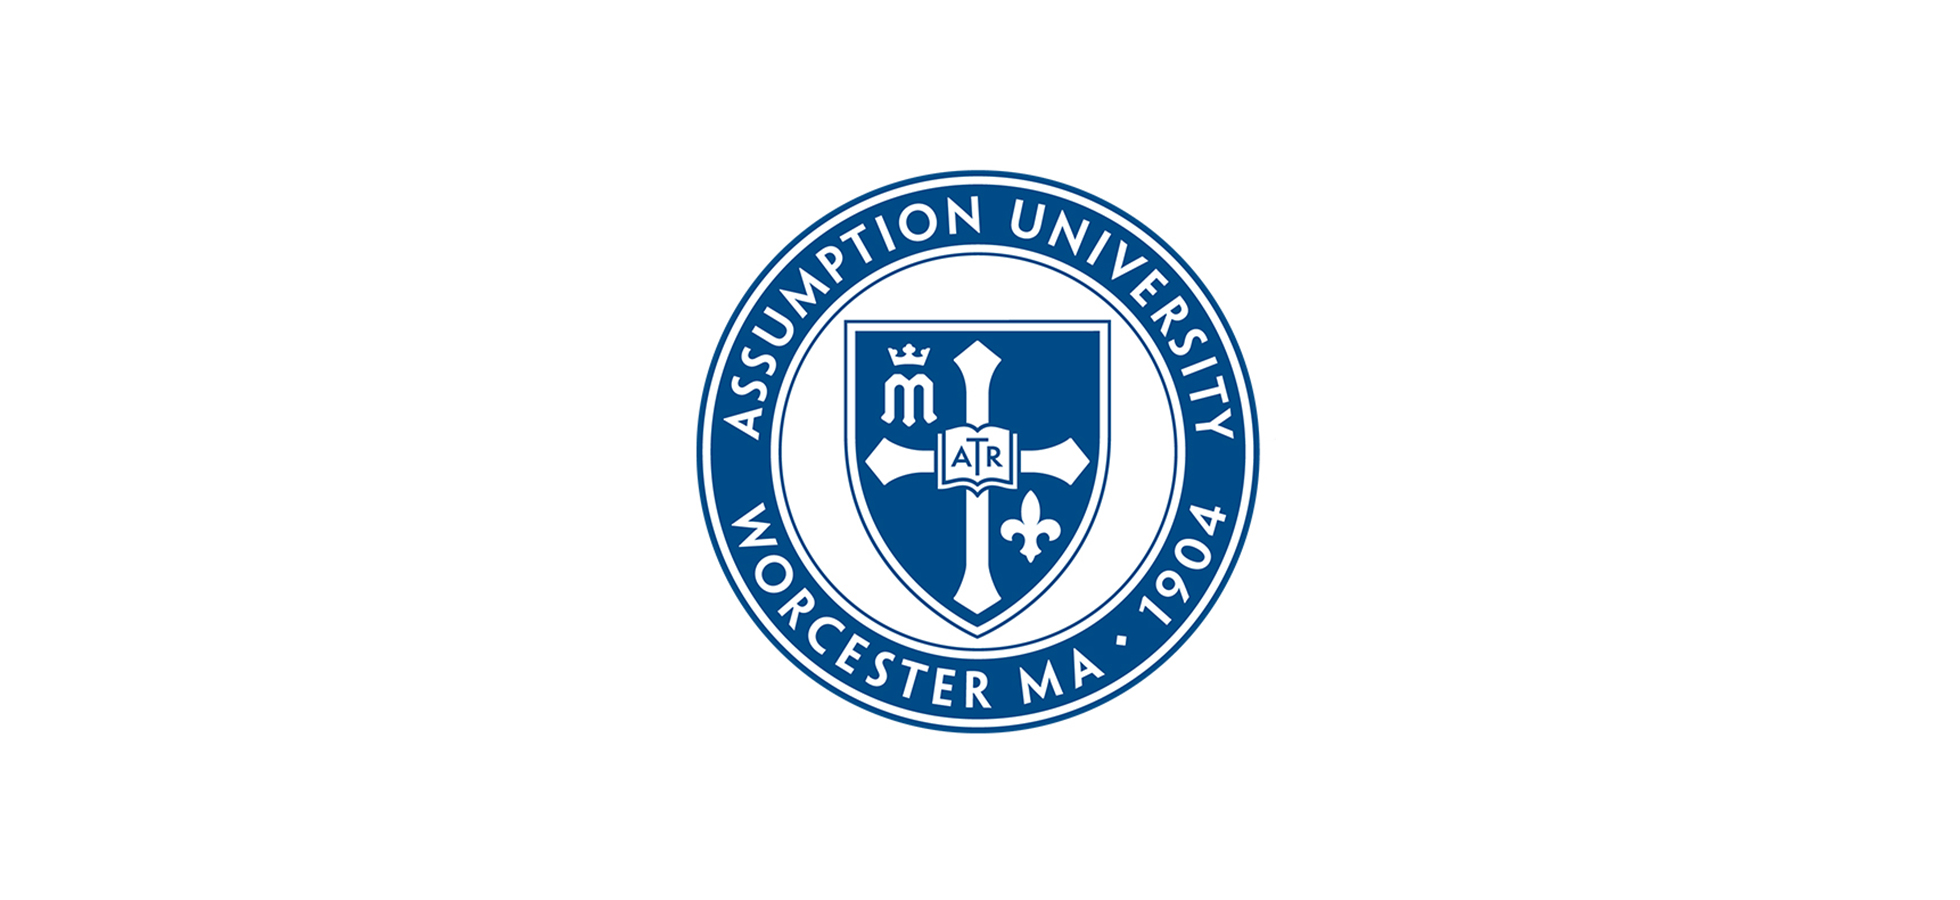 The blue and white seal of Assumption University